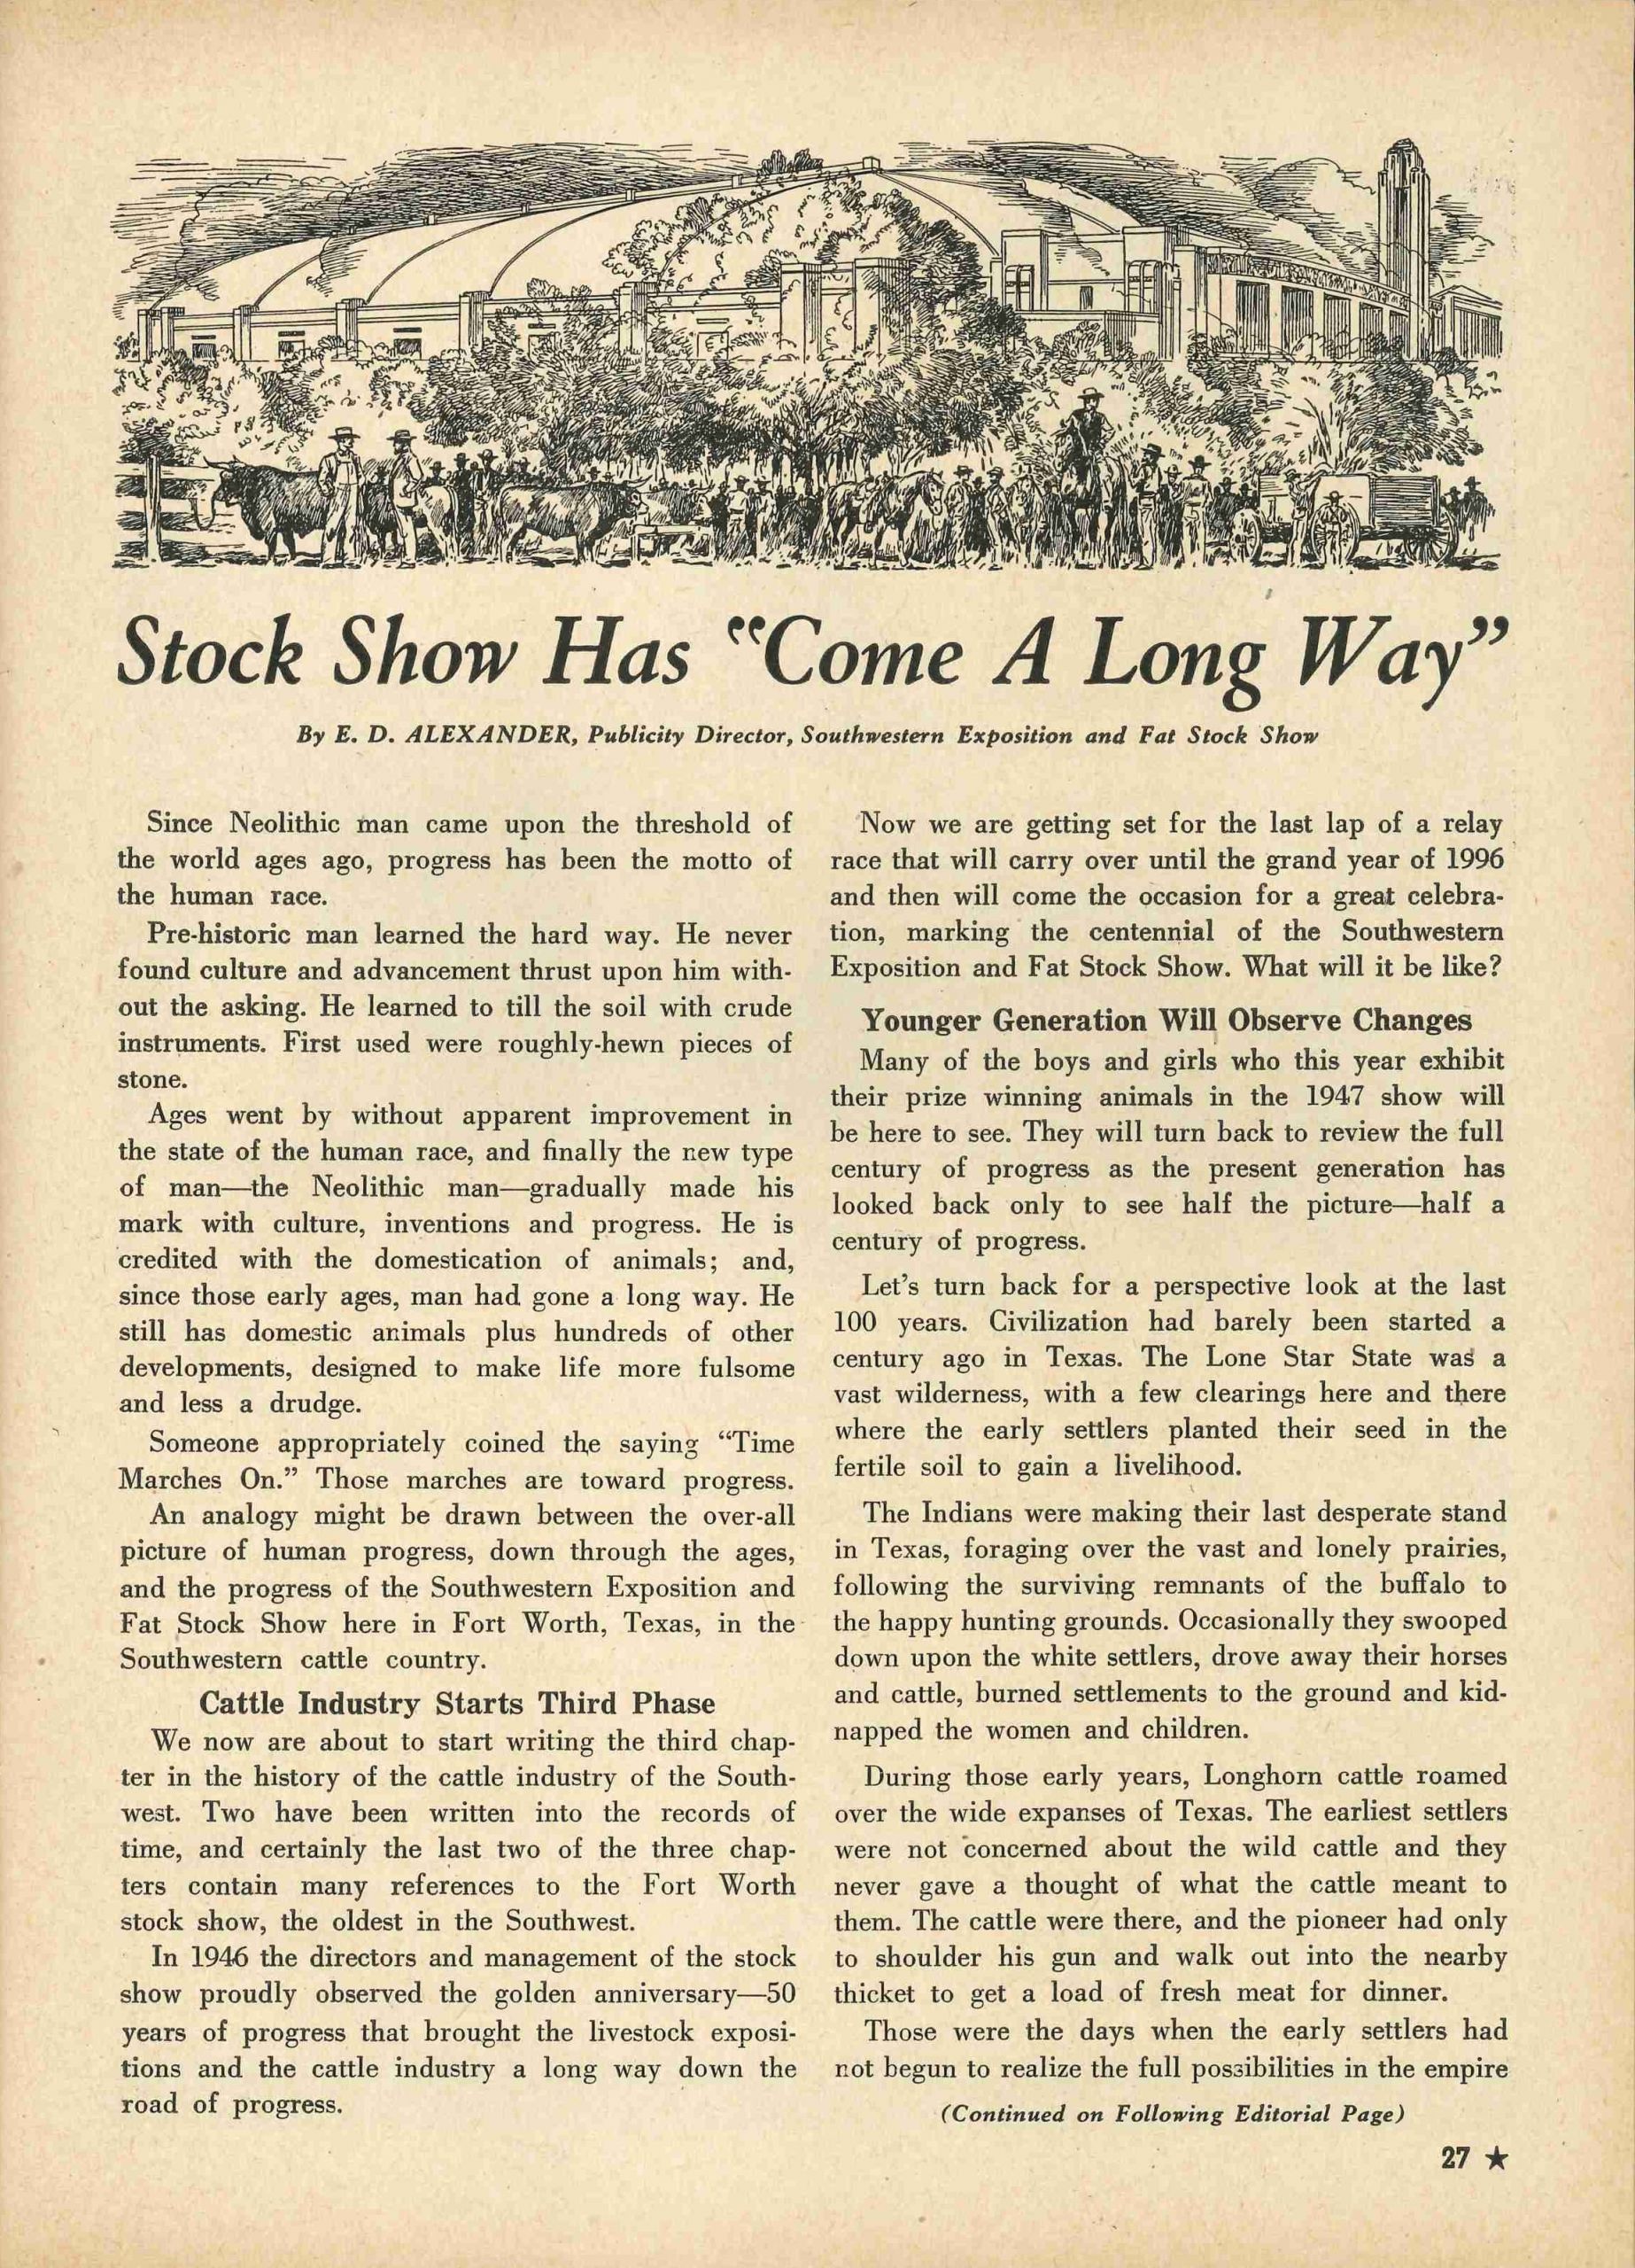 First page of essay from stock show annual about its history